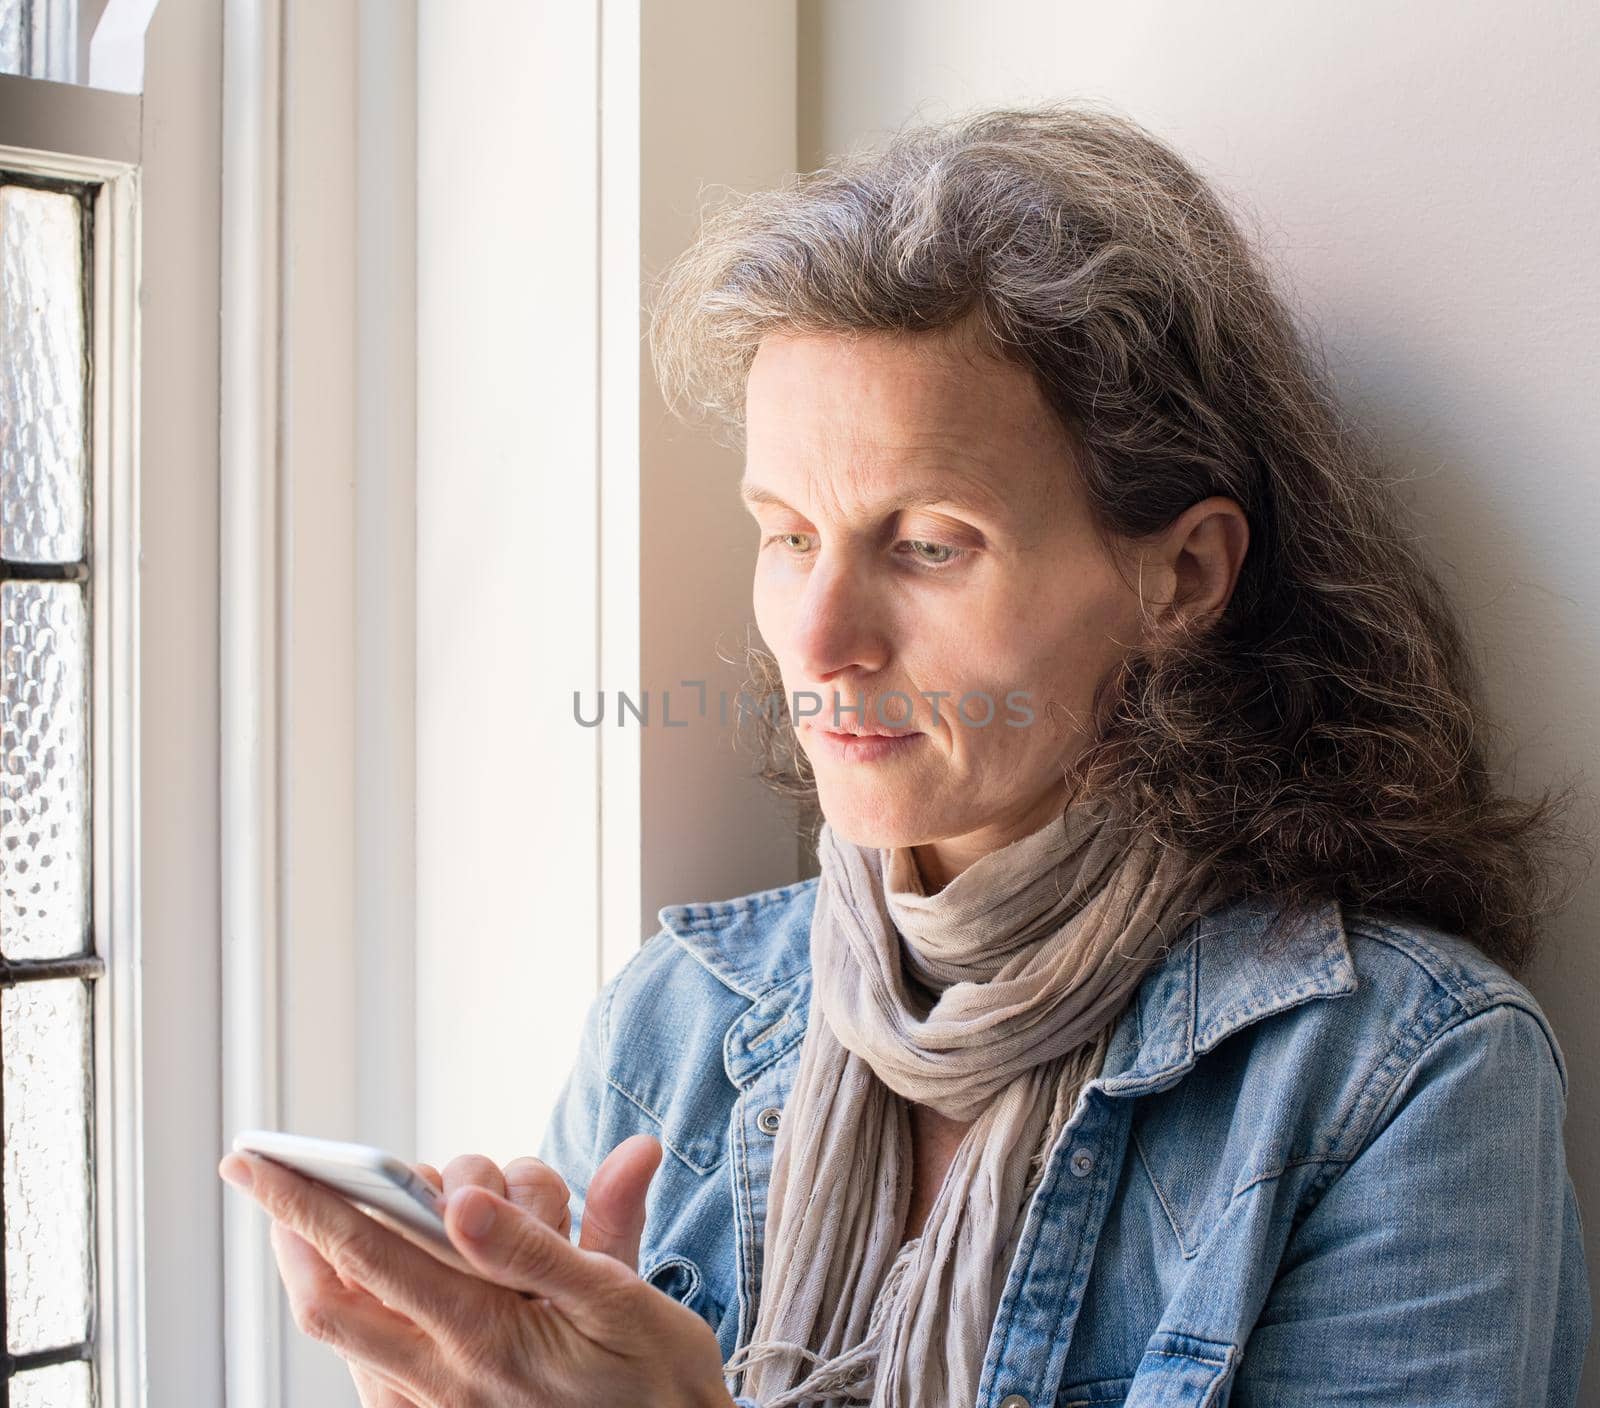 Middle aged woman with grey hair and denim shirt using smart phone next to window (selective focus)